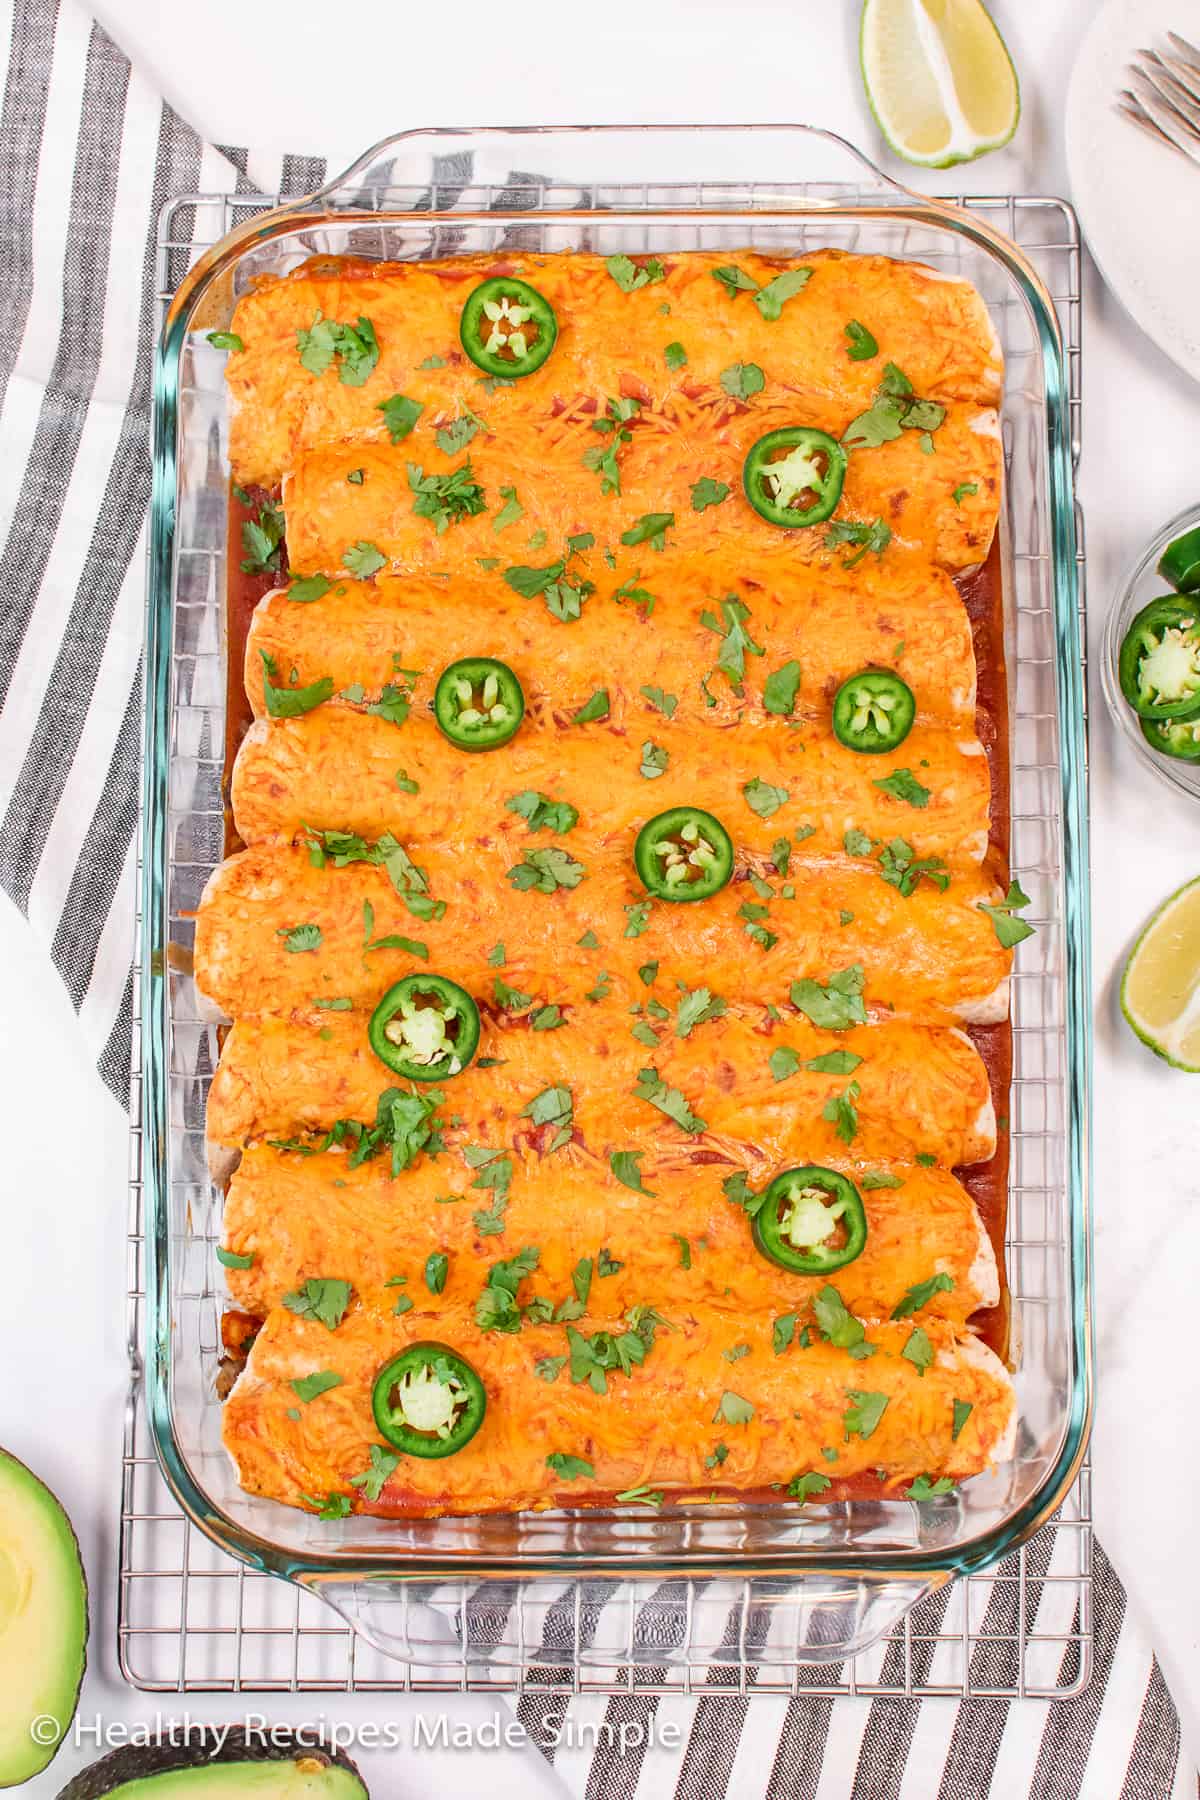 A full pan of low-carb beef enchiladas covered in cheese and topped with cilantro and jalapeño.